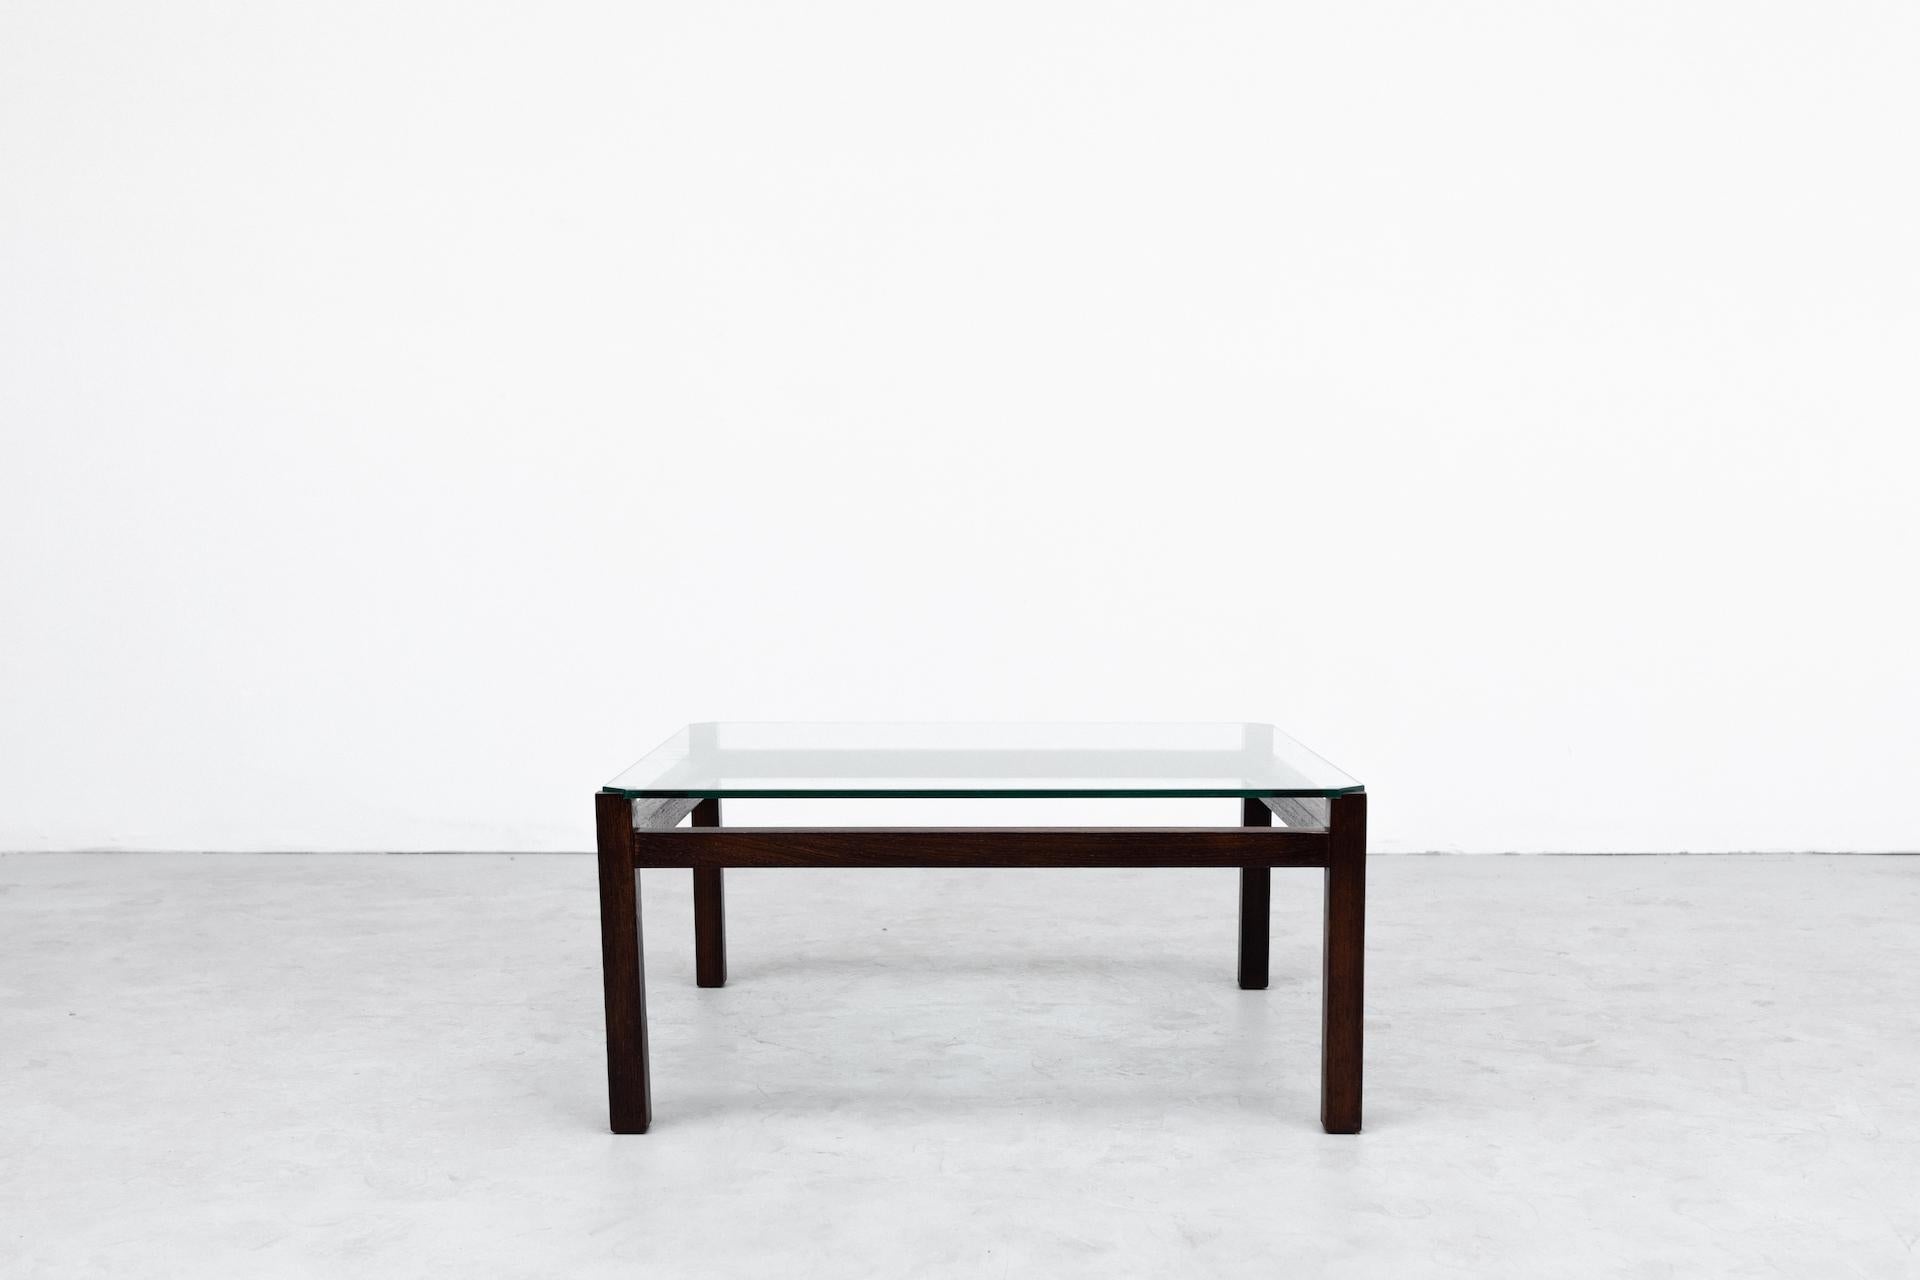 Mid-century 'Langerak' coffee table by Kho Liang Ie for 't Spectrum. Lightly refinished square wenge wood frame with floating glass top. In original condition with wear consistent with age and use.